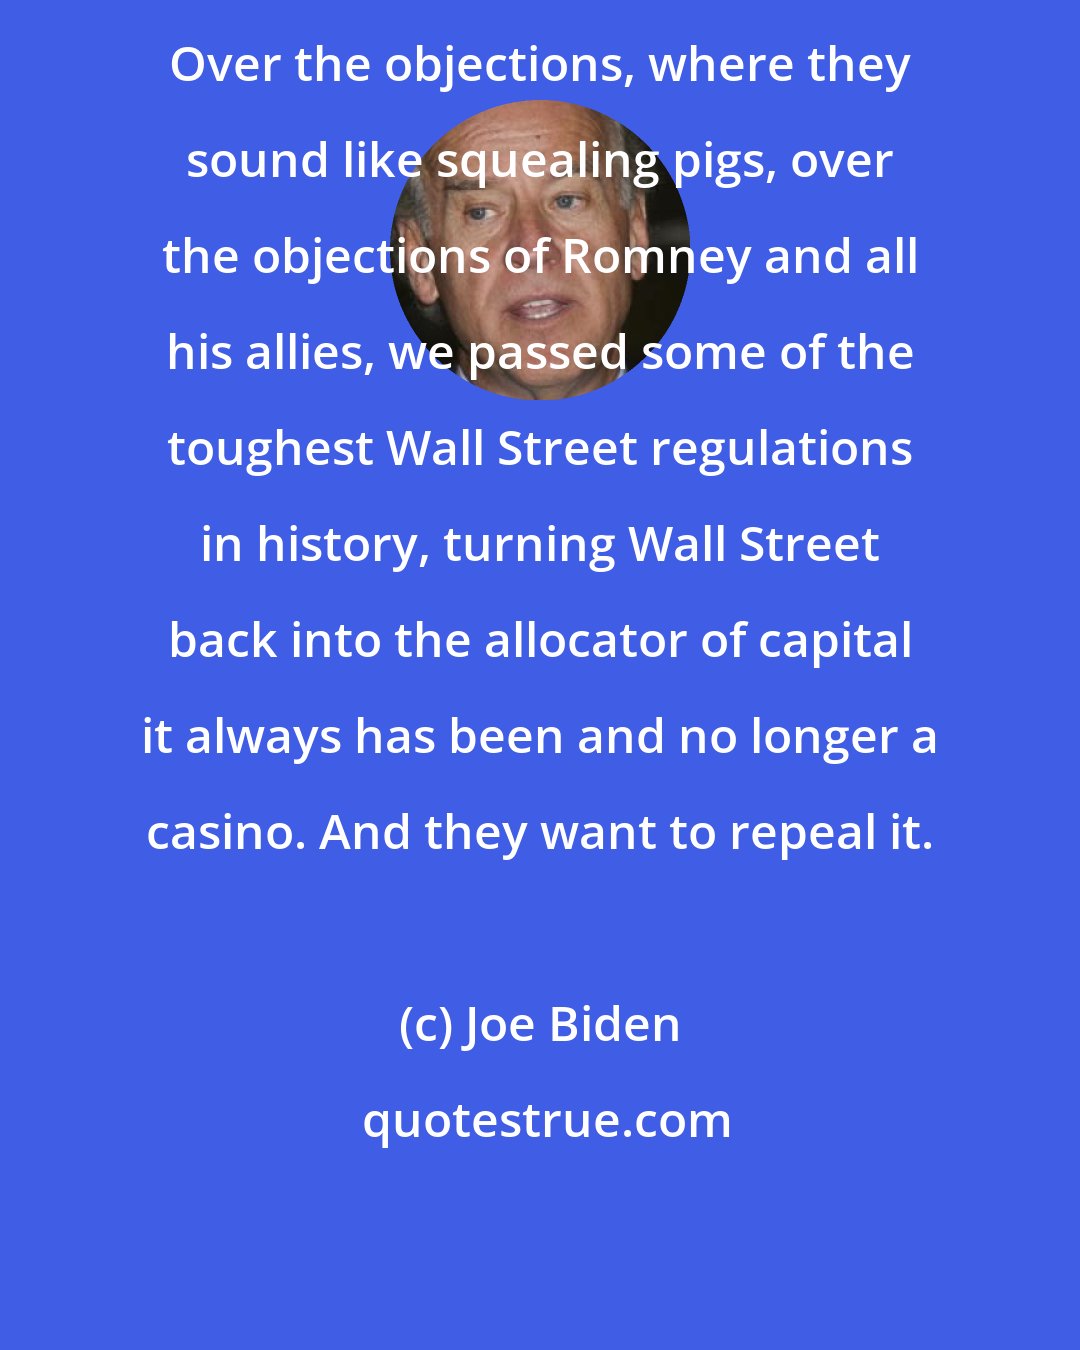 Joe Biden: Over the objections, where they sound like squealing pigs, over the objections of Romney and all his allies, we passed some of the toughest Wall Street regulations in history, turning Wall Street back into the allocator of capital it always has been and no longer a casino. And they want to repeal it.